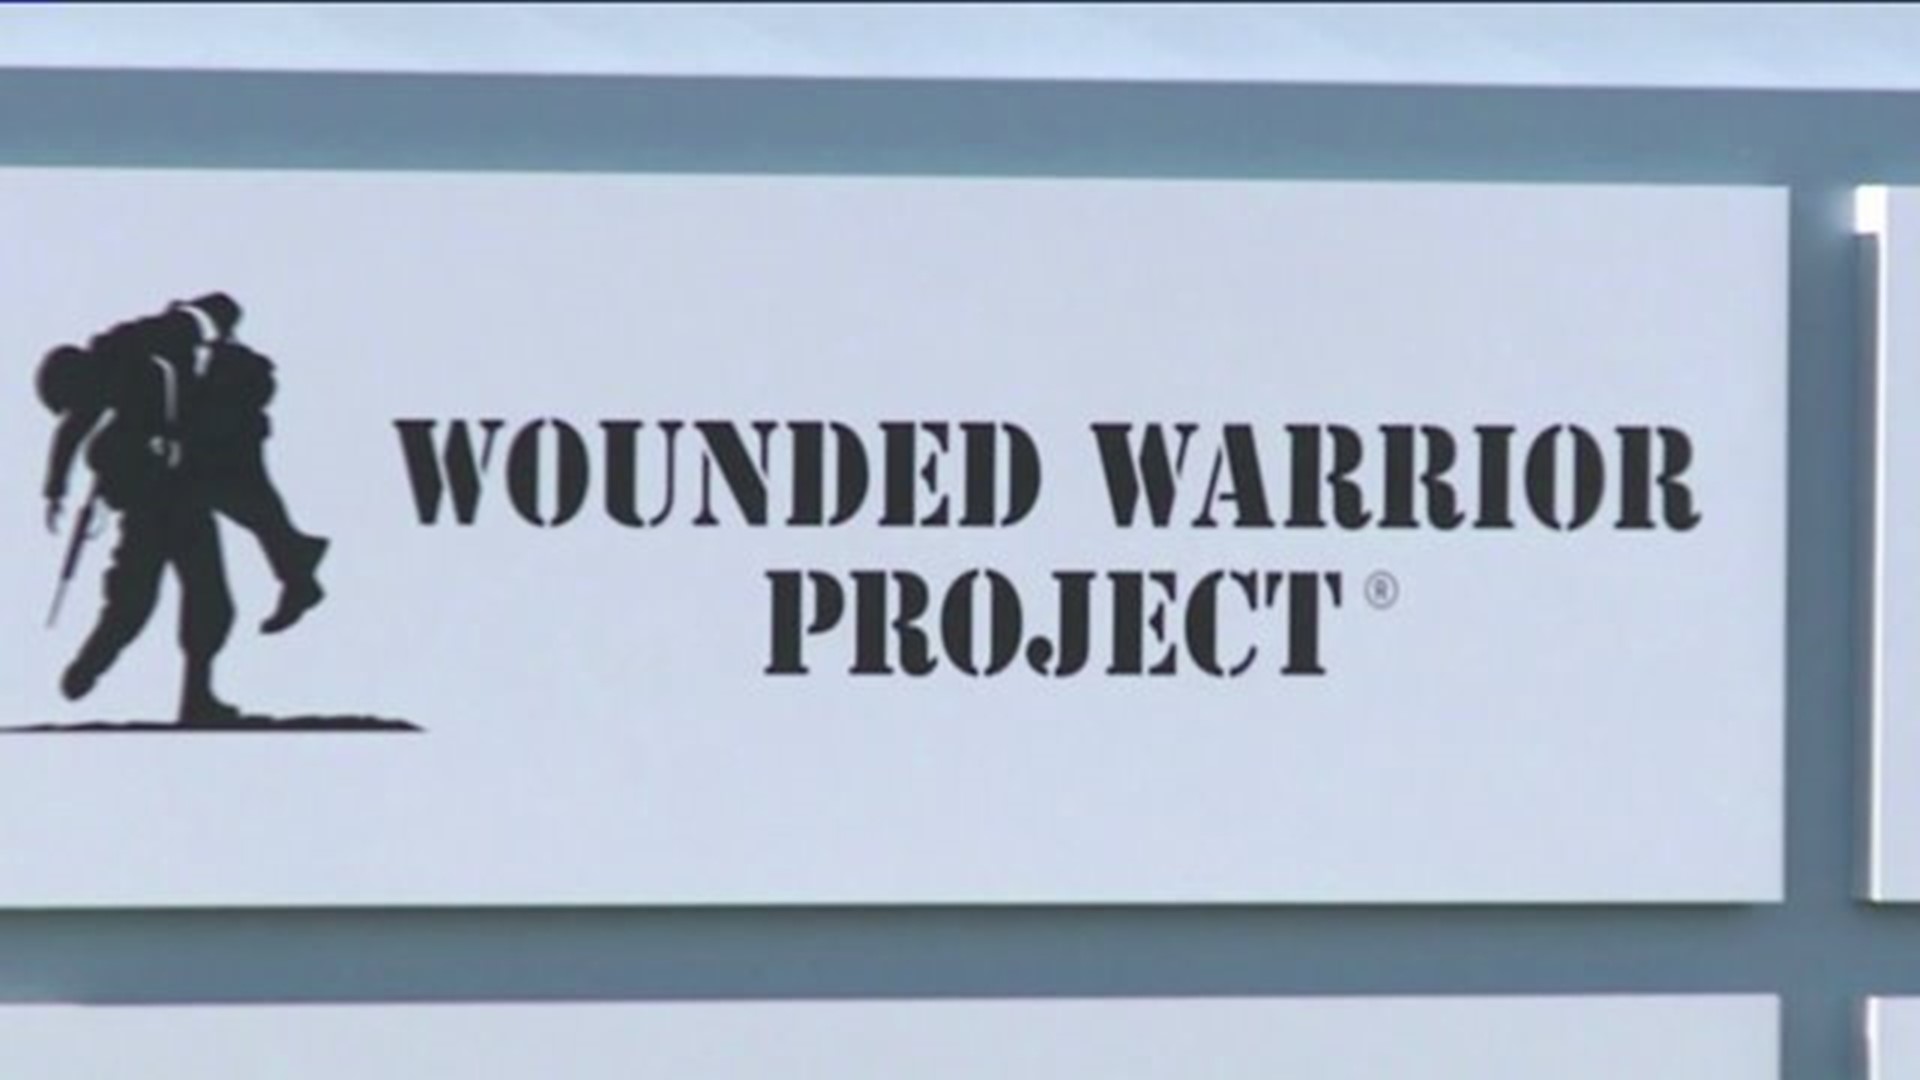 Wounded warriors discuss misdeeds taken by recently fired executives